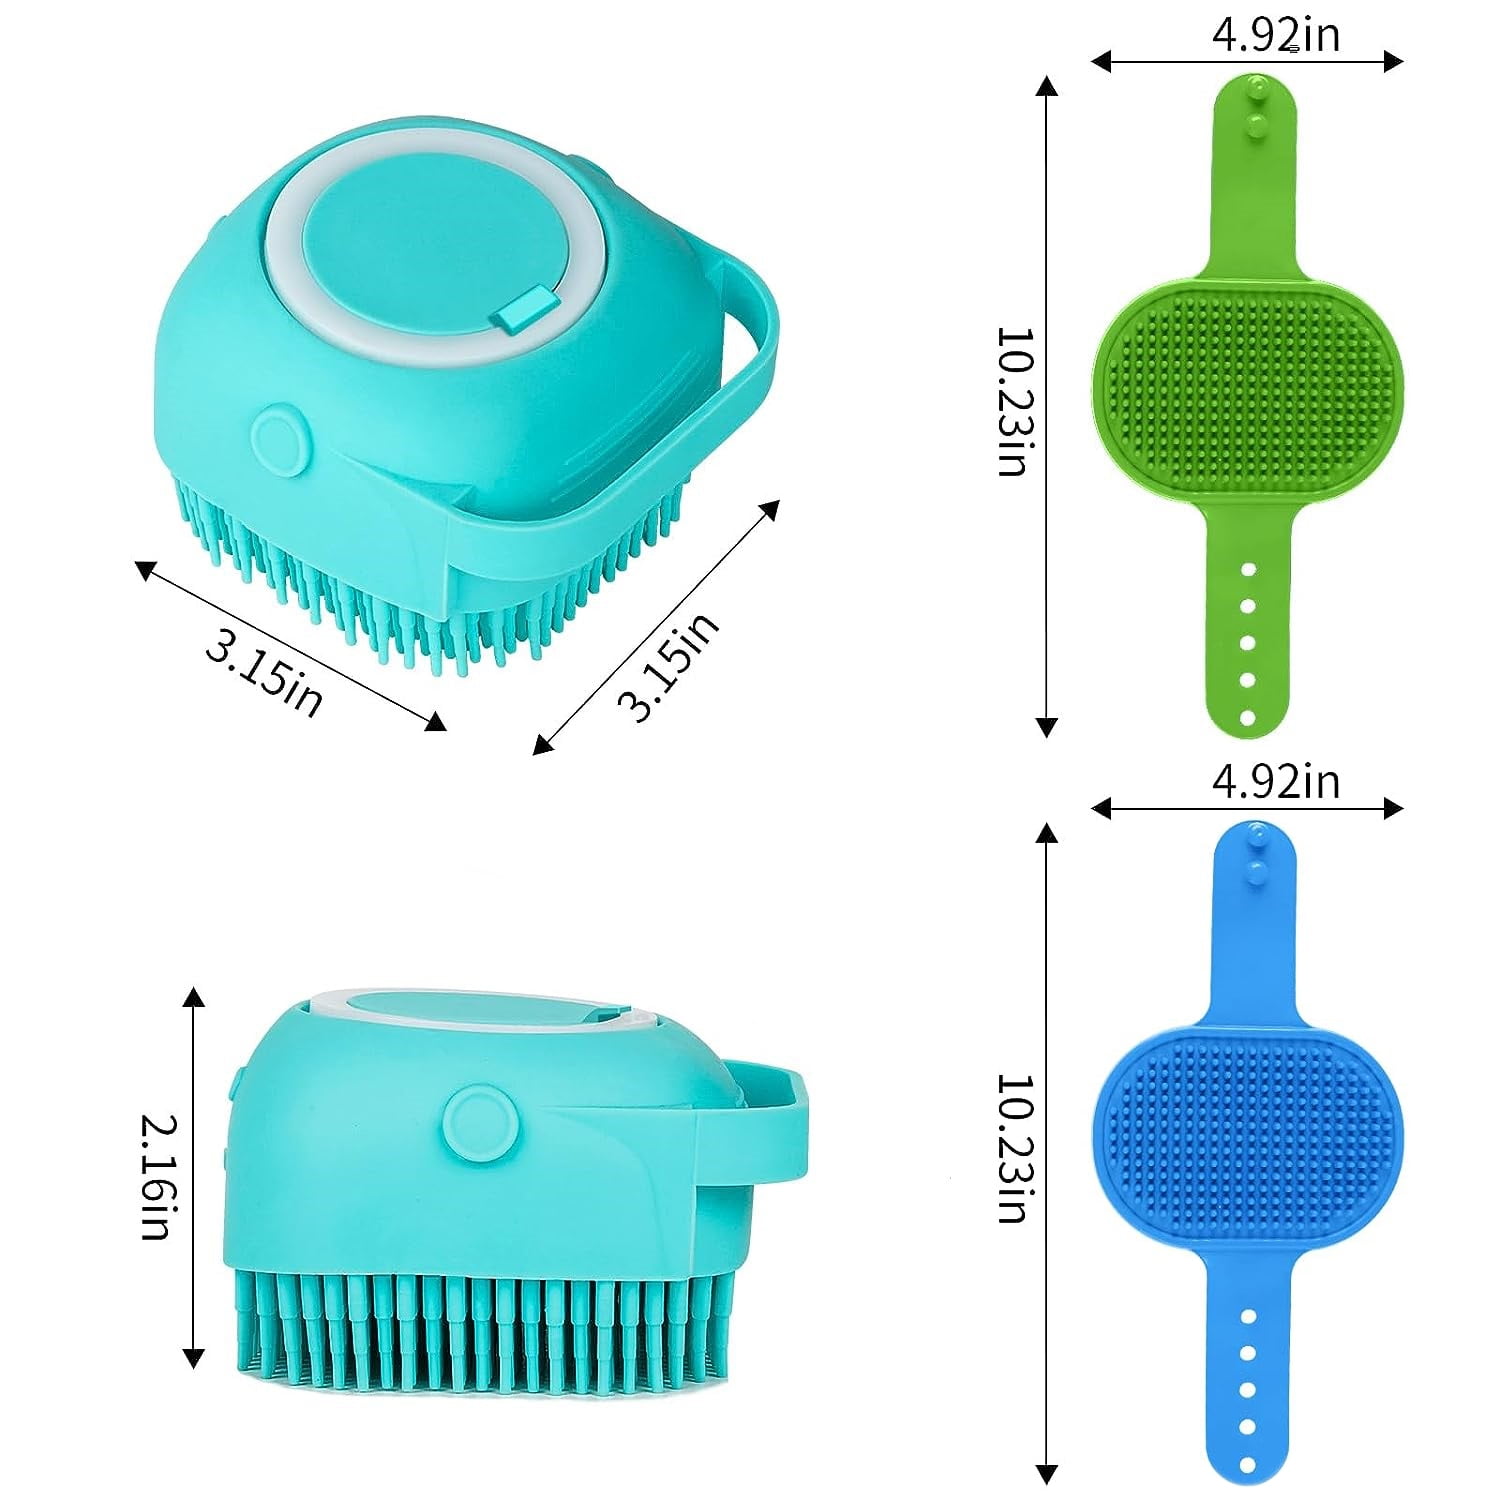 Dog Bath Brush Dog Grooming Brush, Lilpep Pet Shampoo Bath Brush Soothing  Massage Rubber Comb with Adjustable Ring Handle for Long Short Haired Dogs